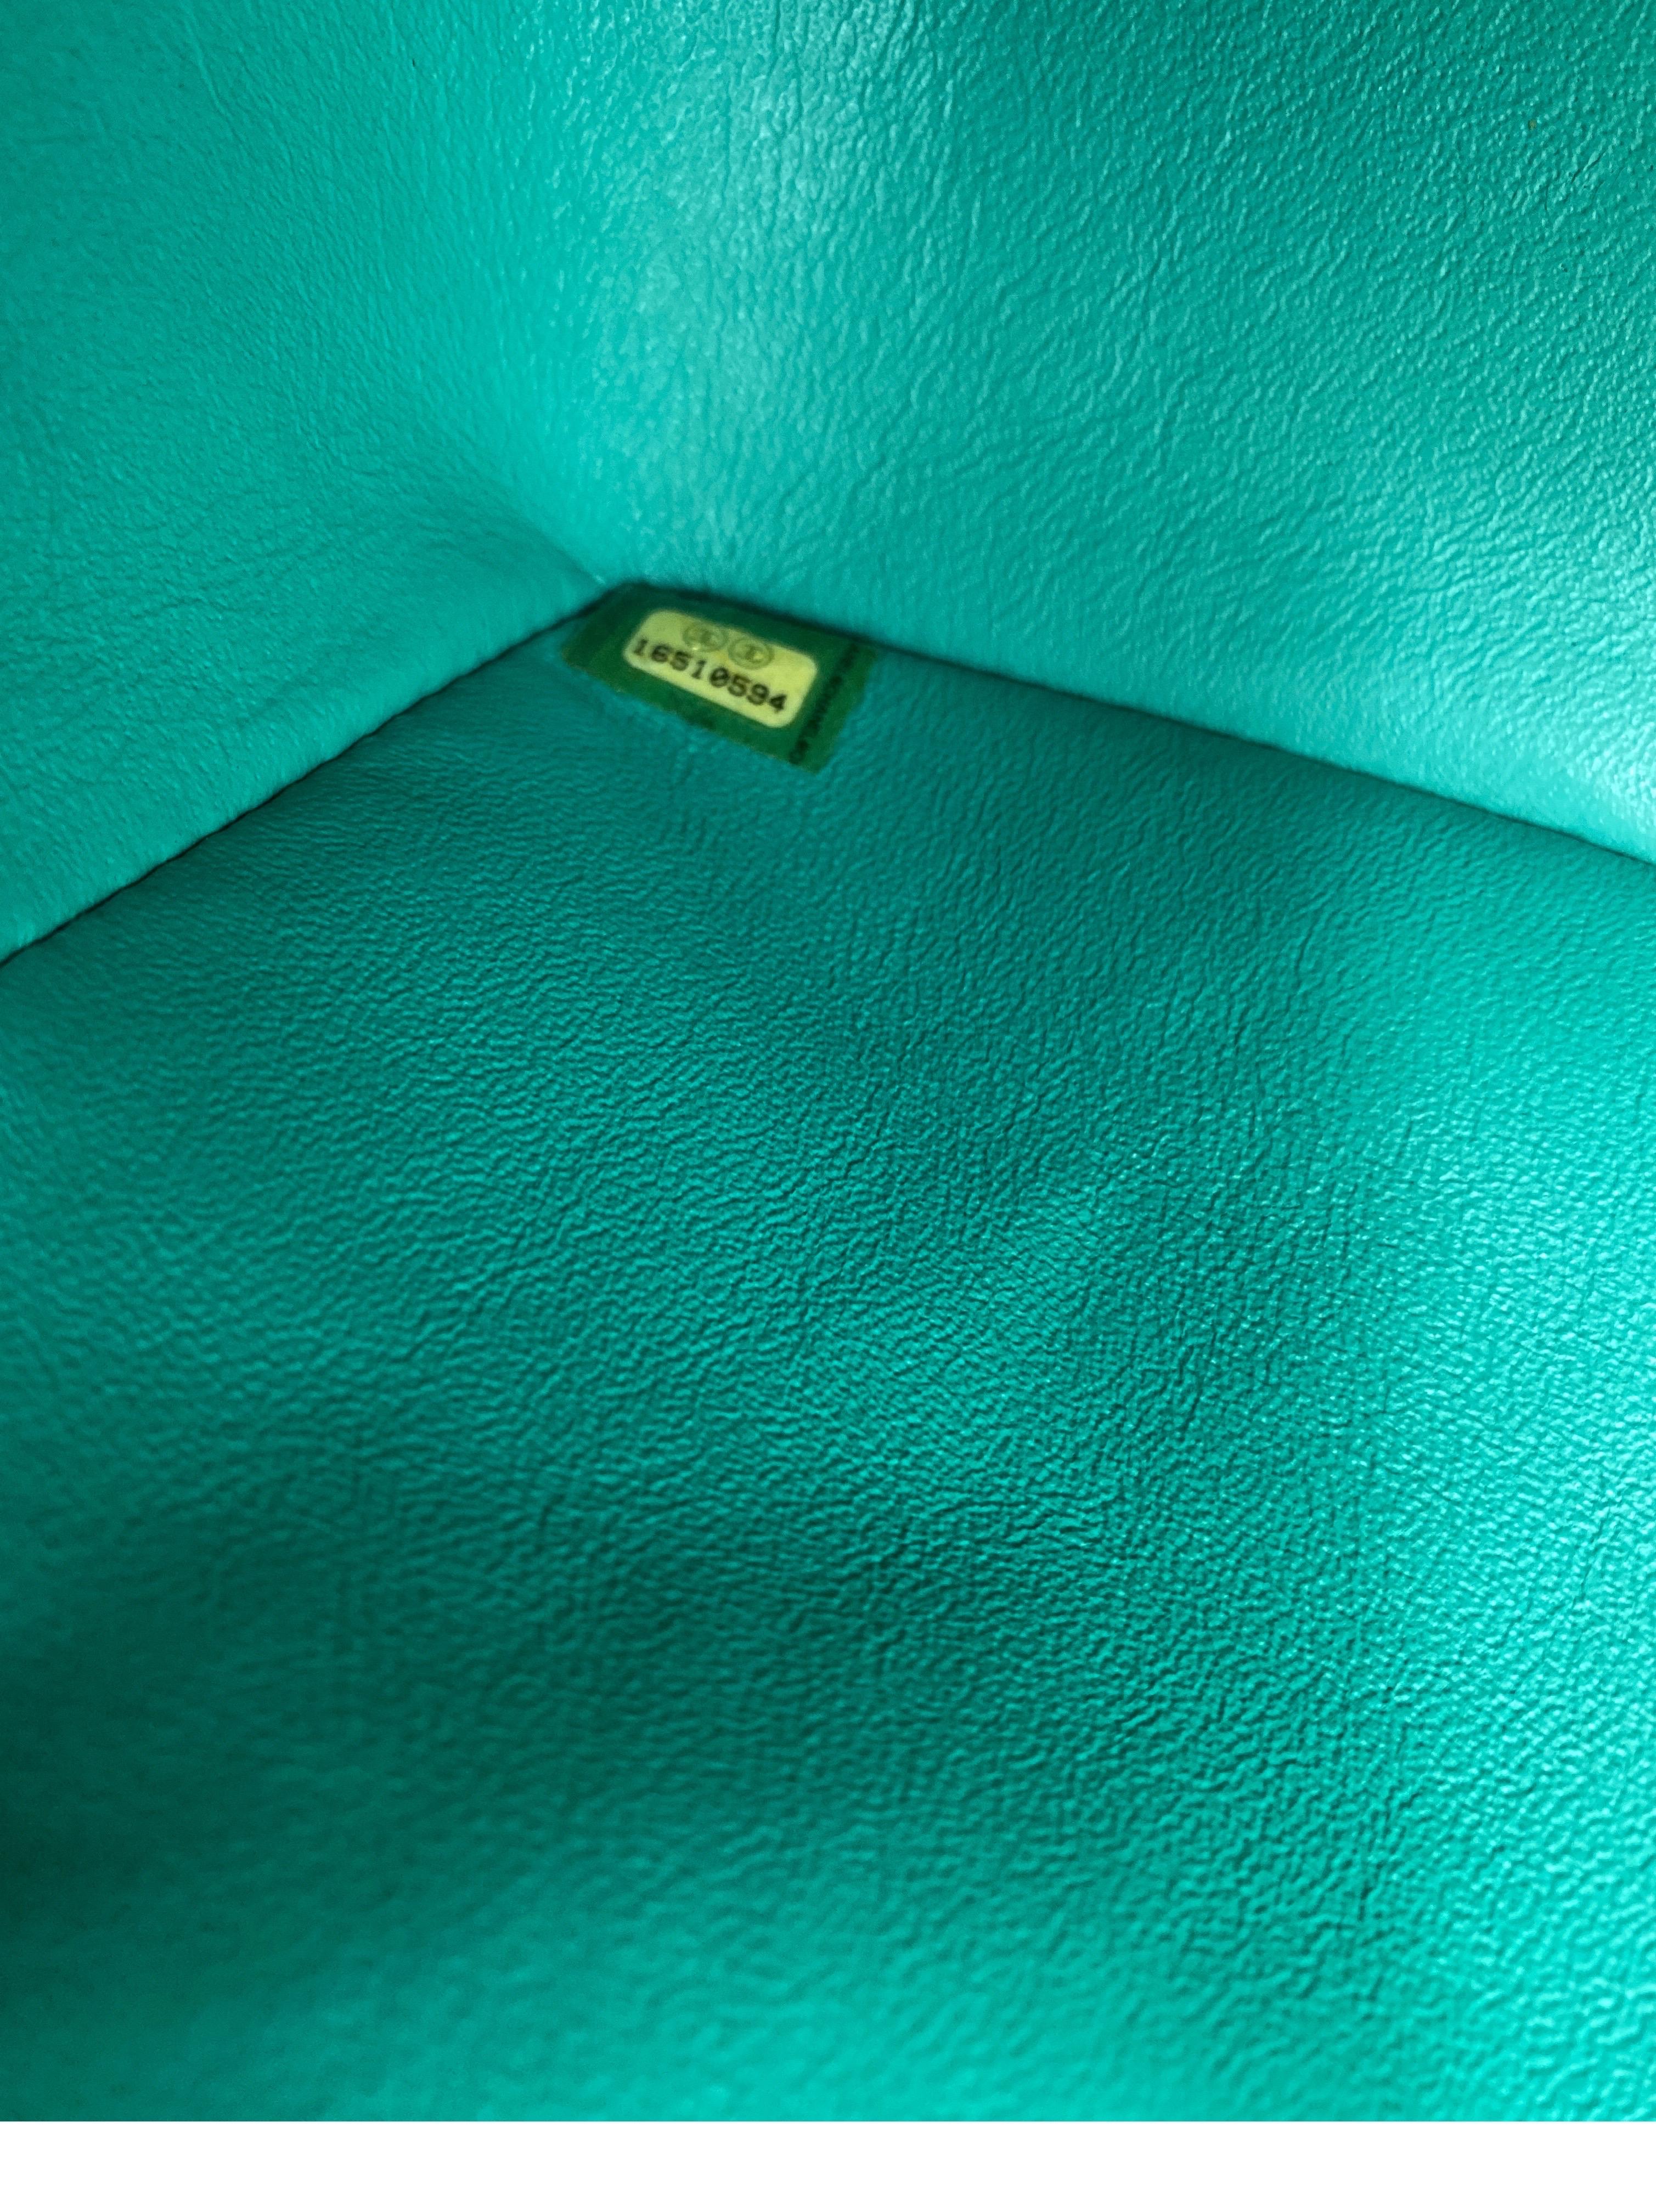 Chanel Teal Maxi Double Flap Bag 13